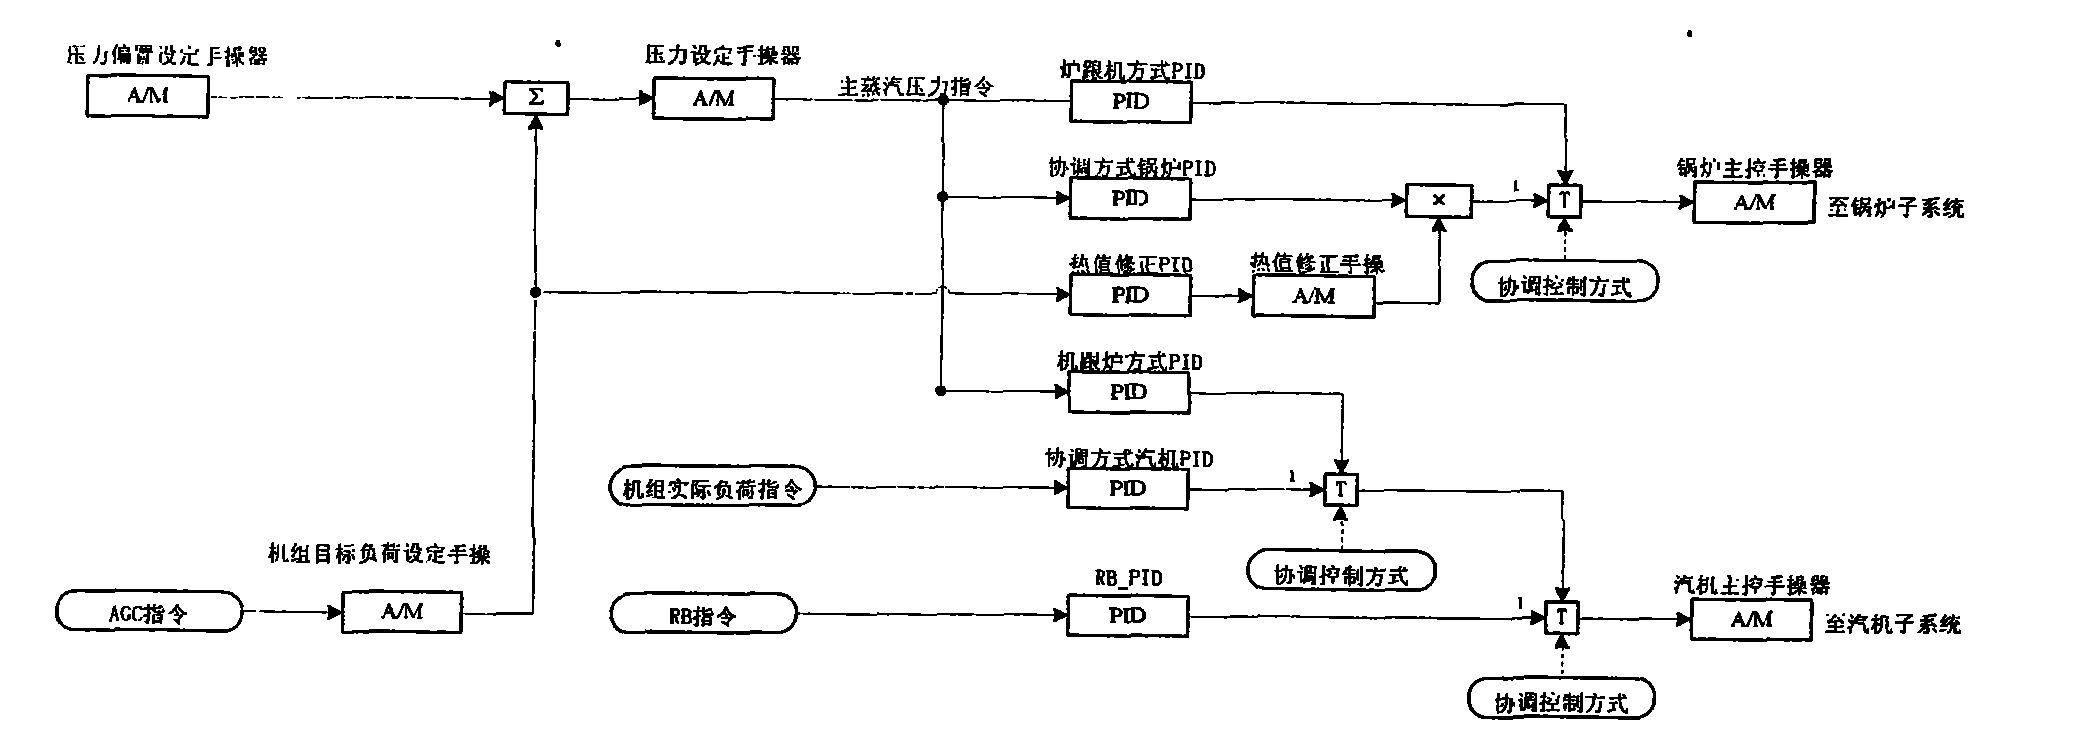 Coordinated control system (CCS) of large-size circulating fluidized bed boiler (CFBB) unit